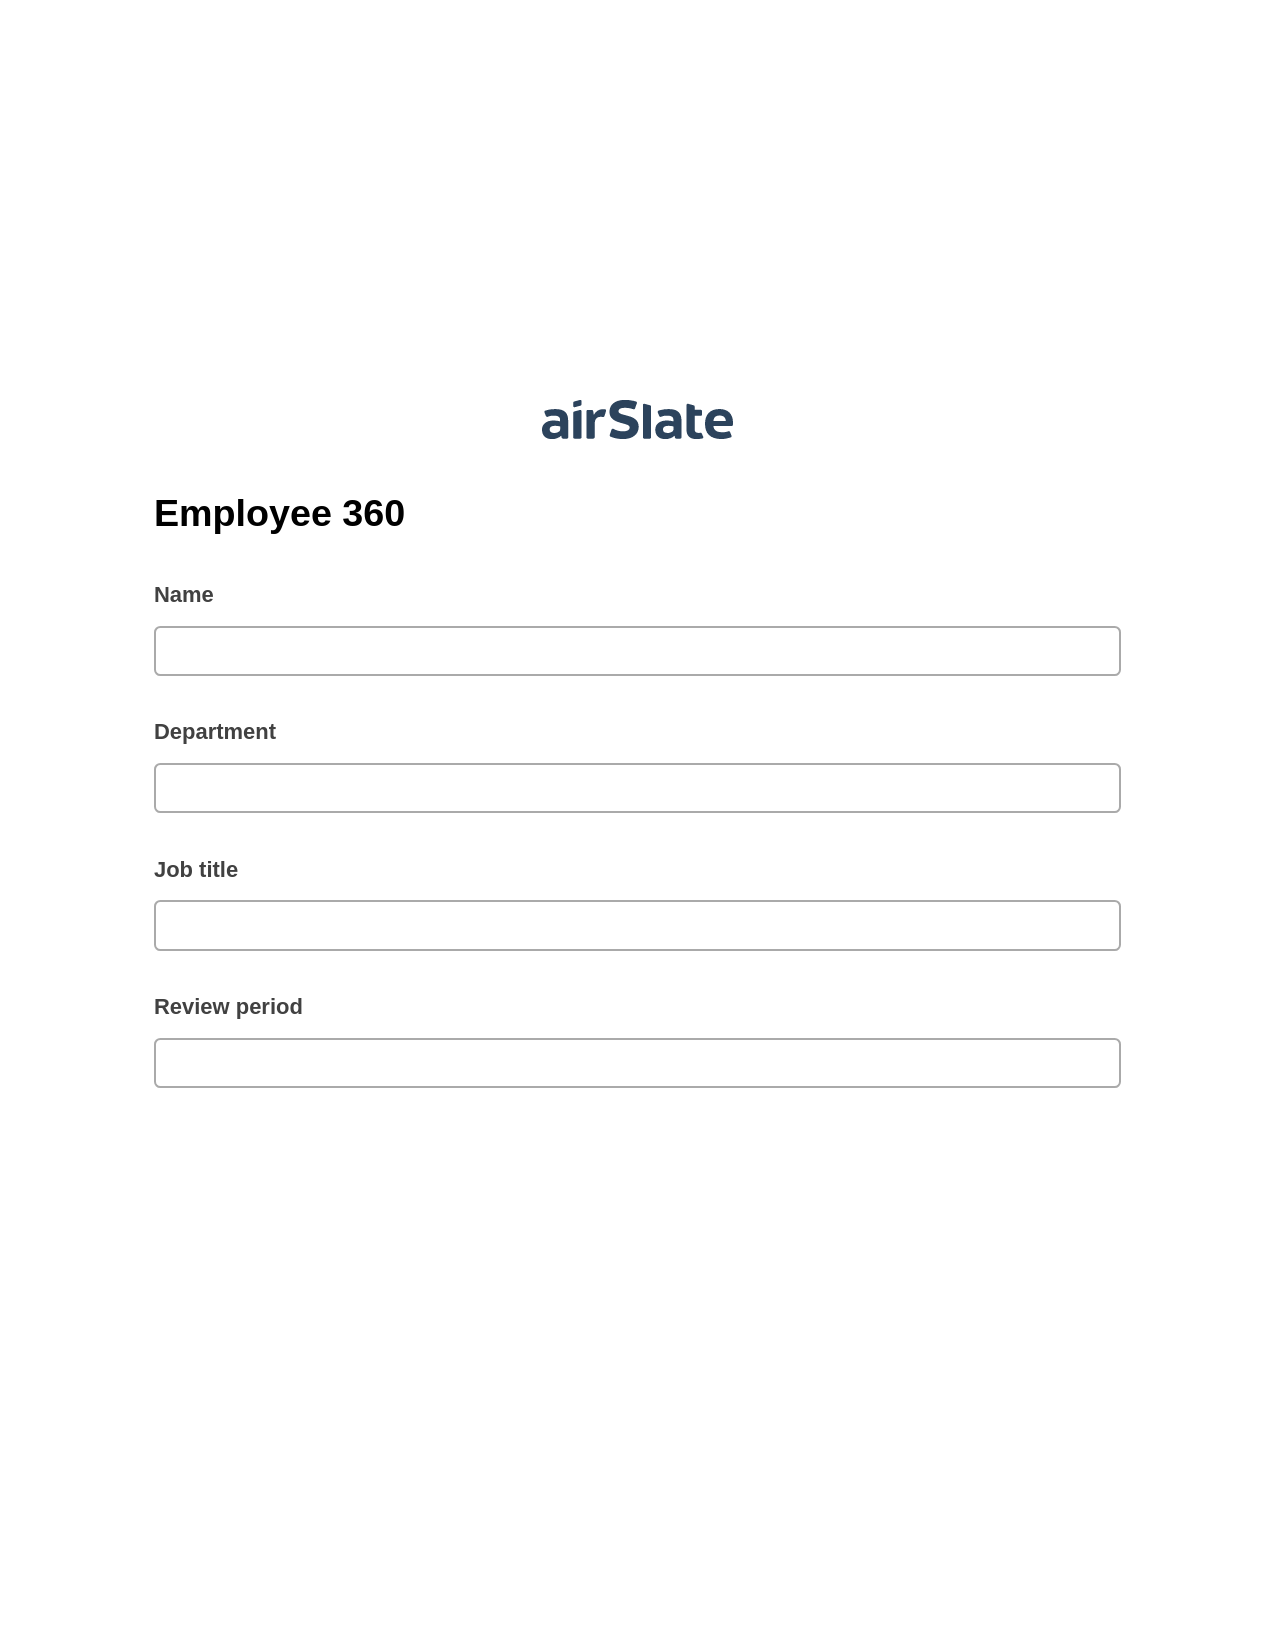 Employee 360 Pre-fill from another Slate Bot, Open under a Role Bot, Email Notification Postfinish Bot